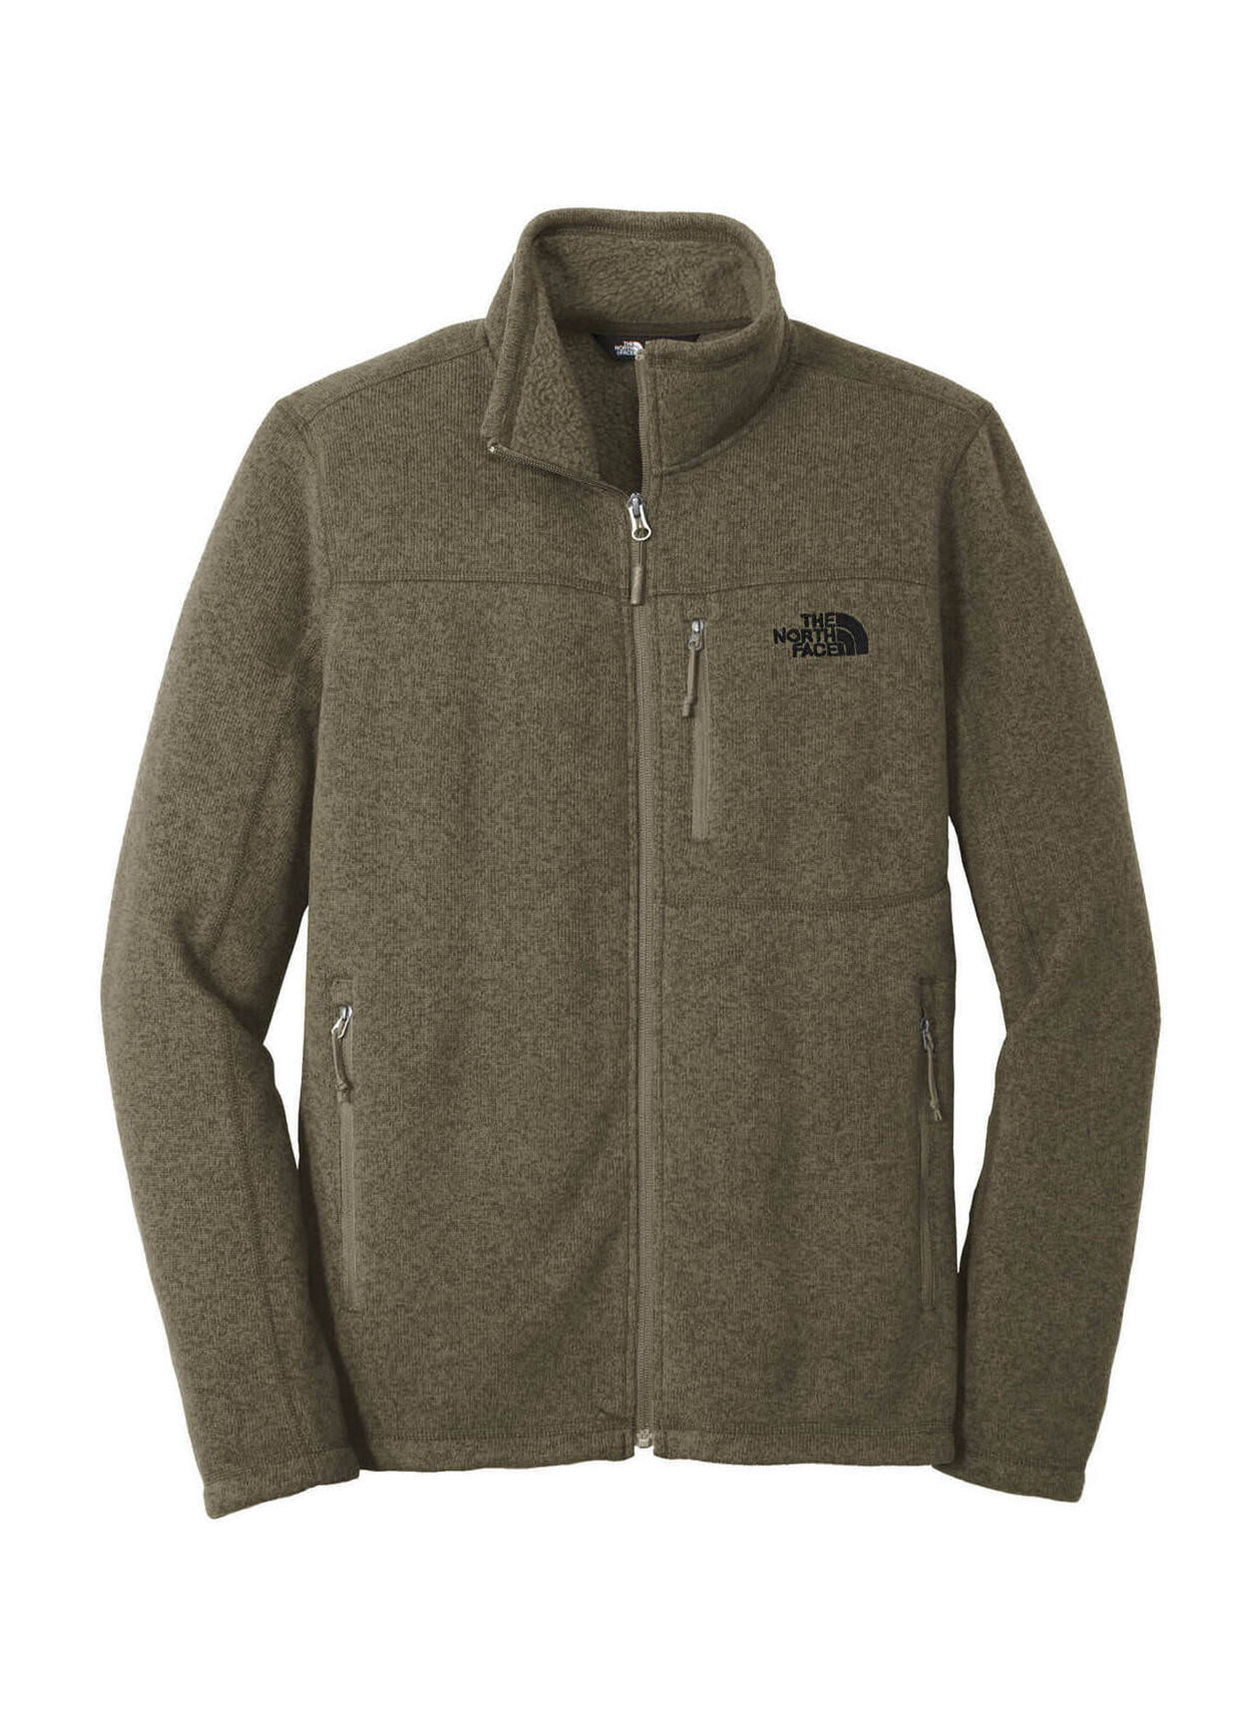 The North Face Men's New Taupe Green Heather Sweater Fleece Jacket ...